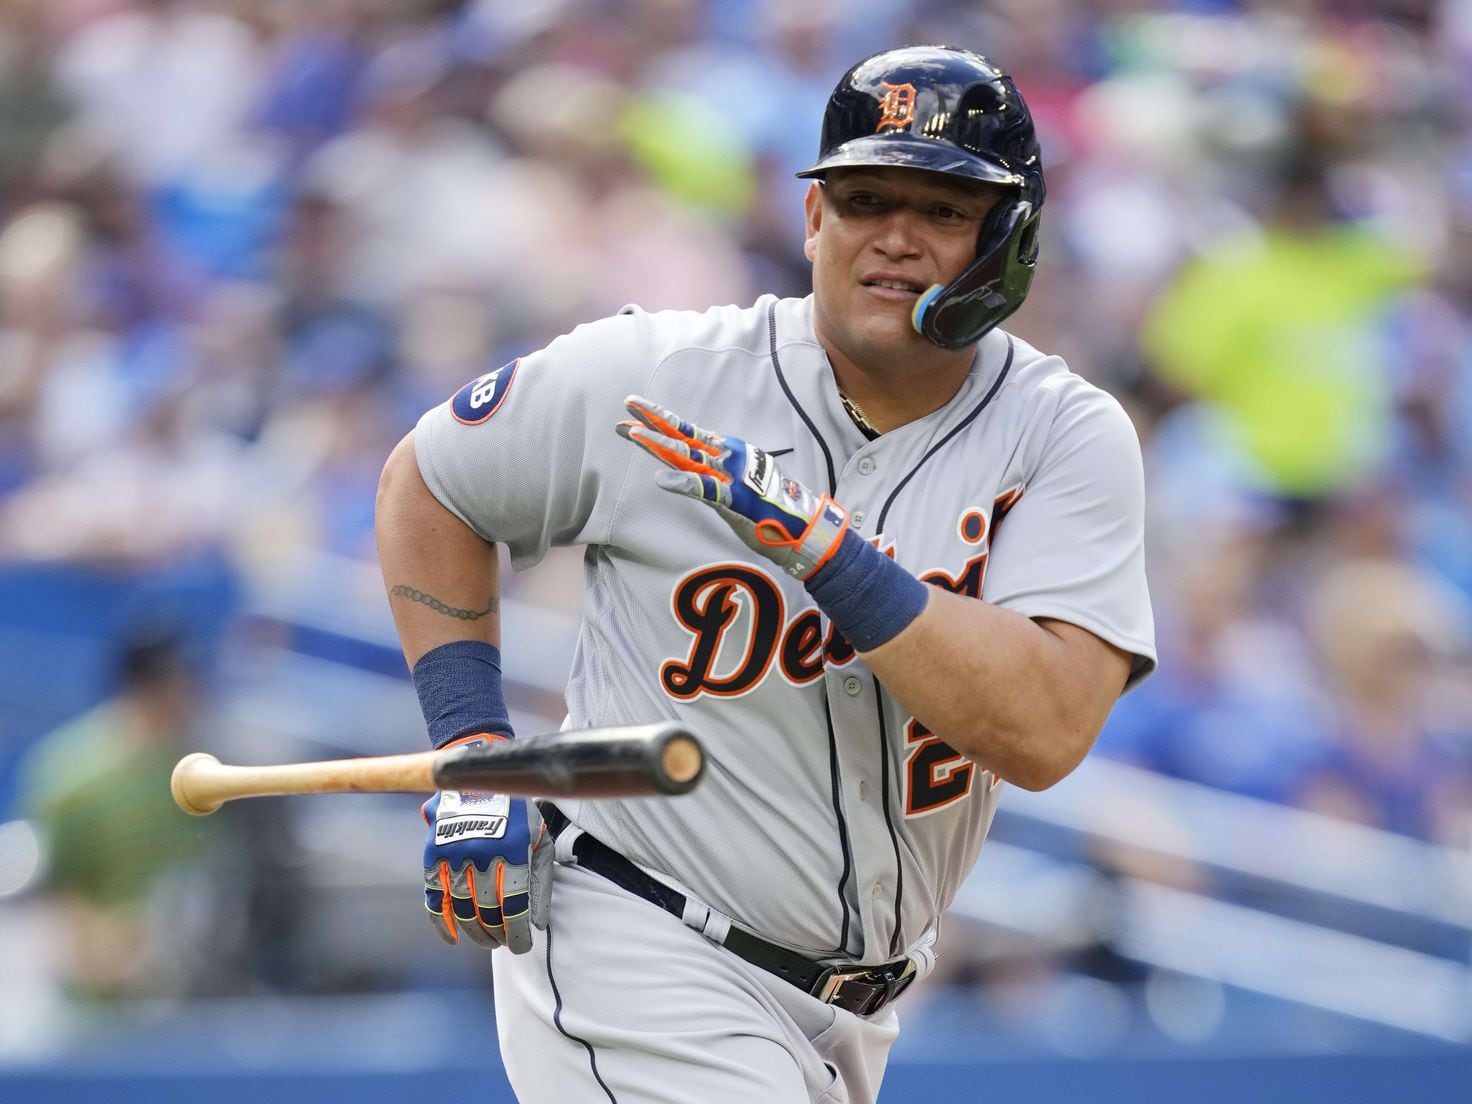 Tigers star Miguel Cabrera says 2023 likely his last season before